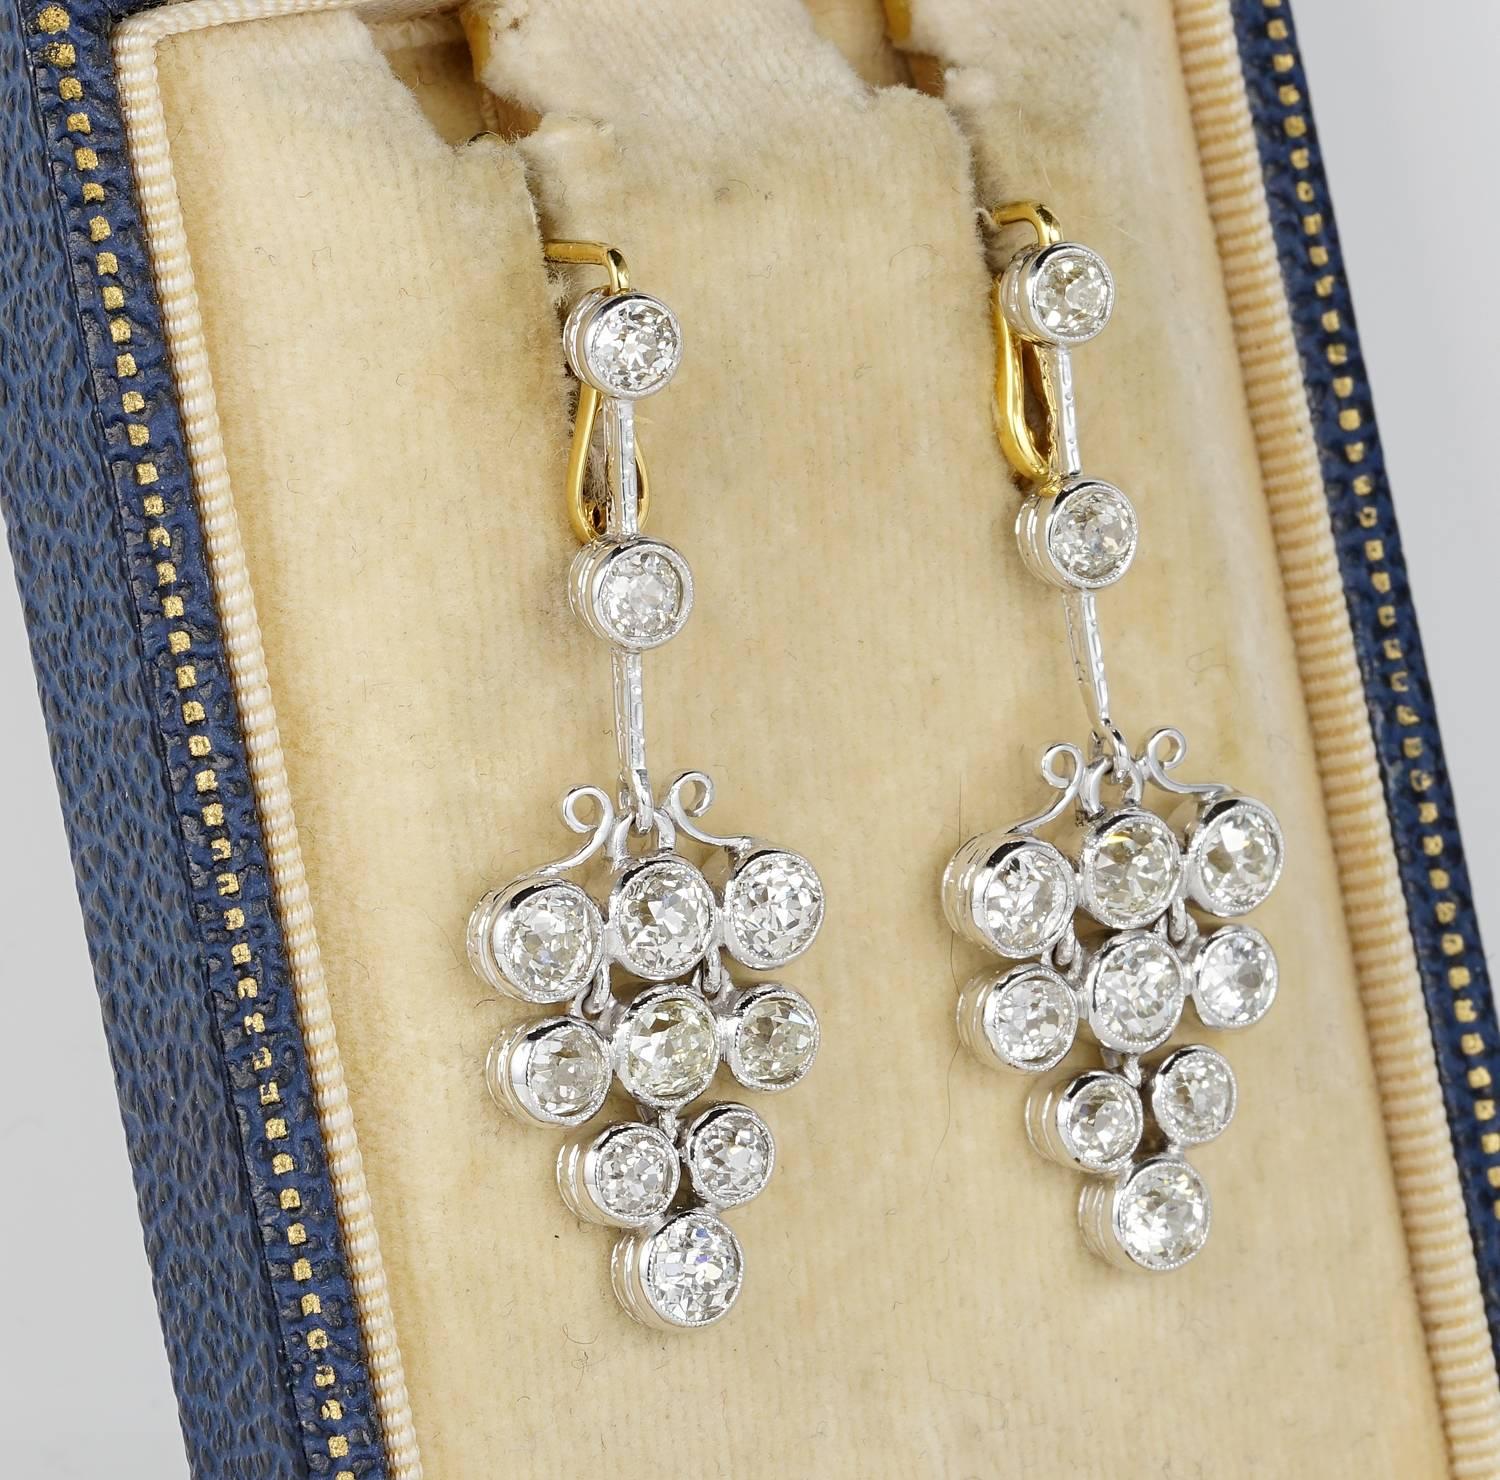 Beauty for Ever

Some jewellery has no time and beauty meant to surprise when made will never get unsurpassed, no matter when, the effect it will sort out will always be WOW
These are outstanding pair of early Art Deco era drop earrings in an